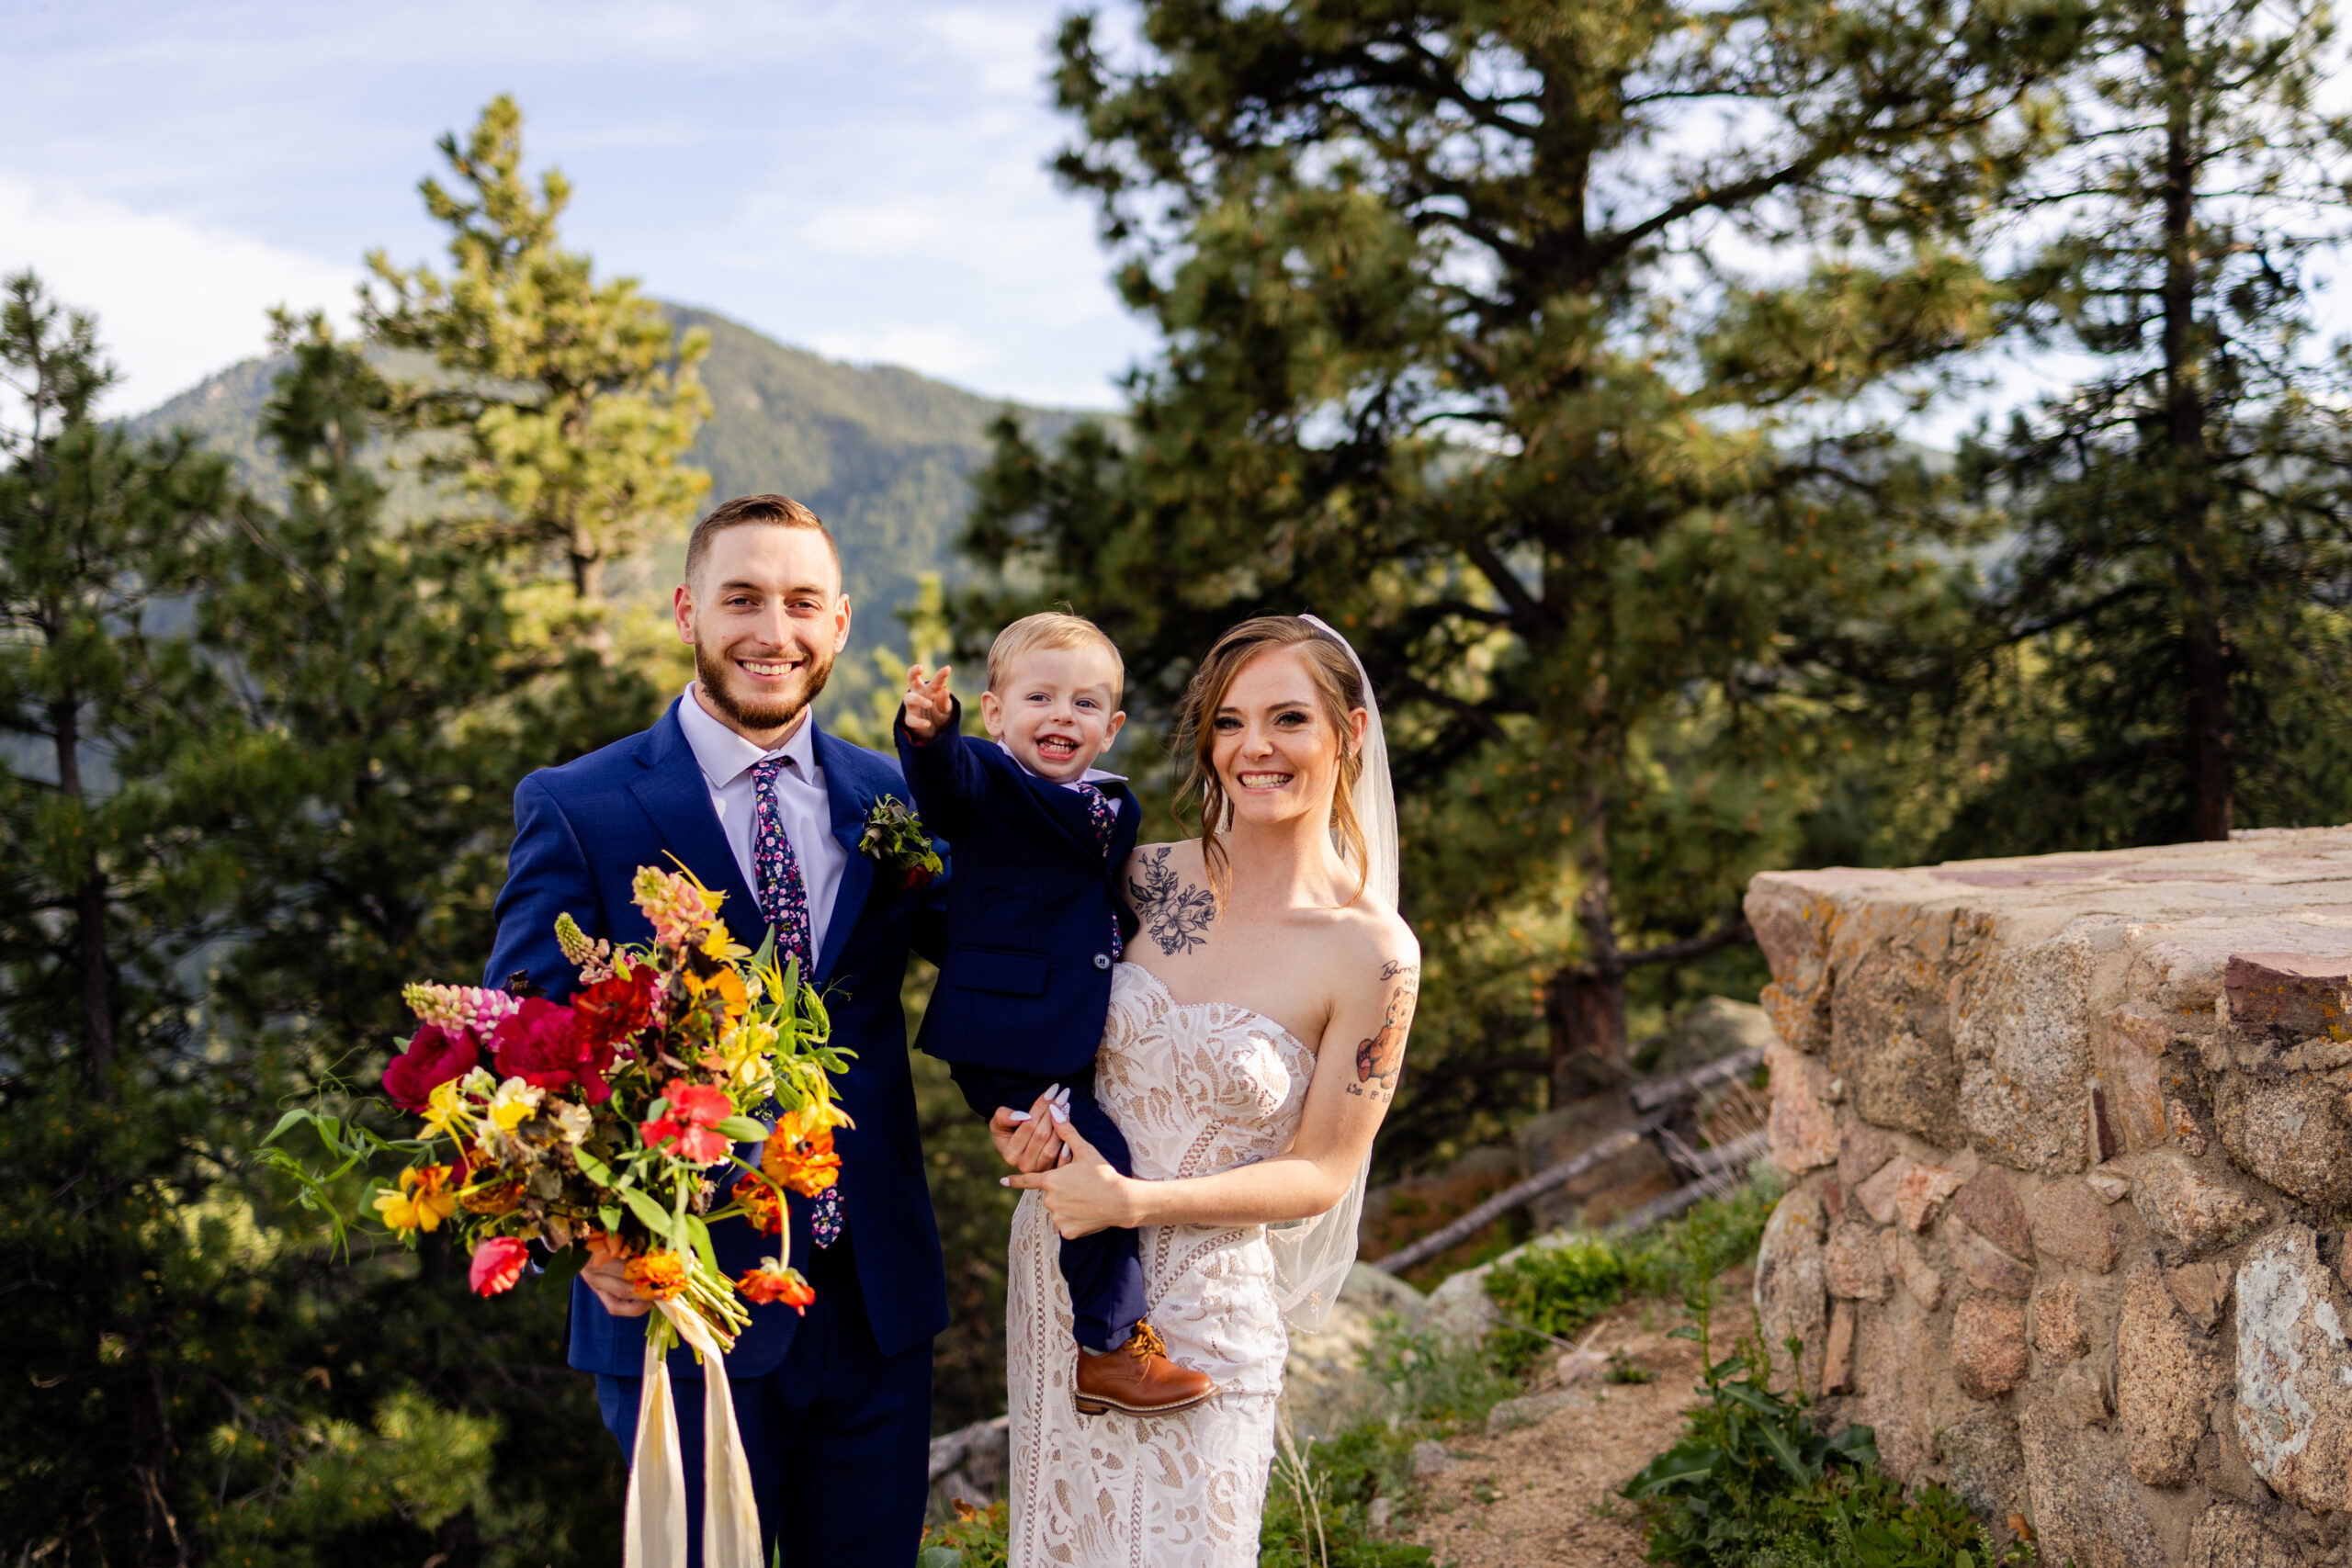 A family shot of the bride and groom with their son at Sunrise Amphitheater during their Elopement.